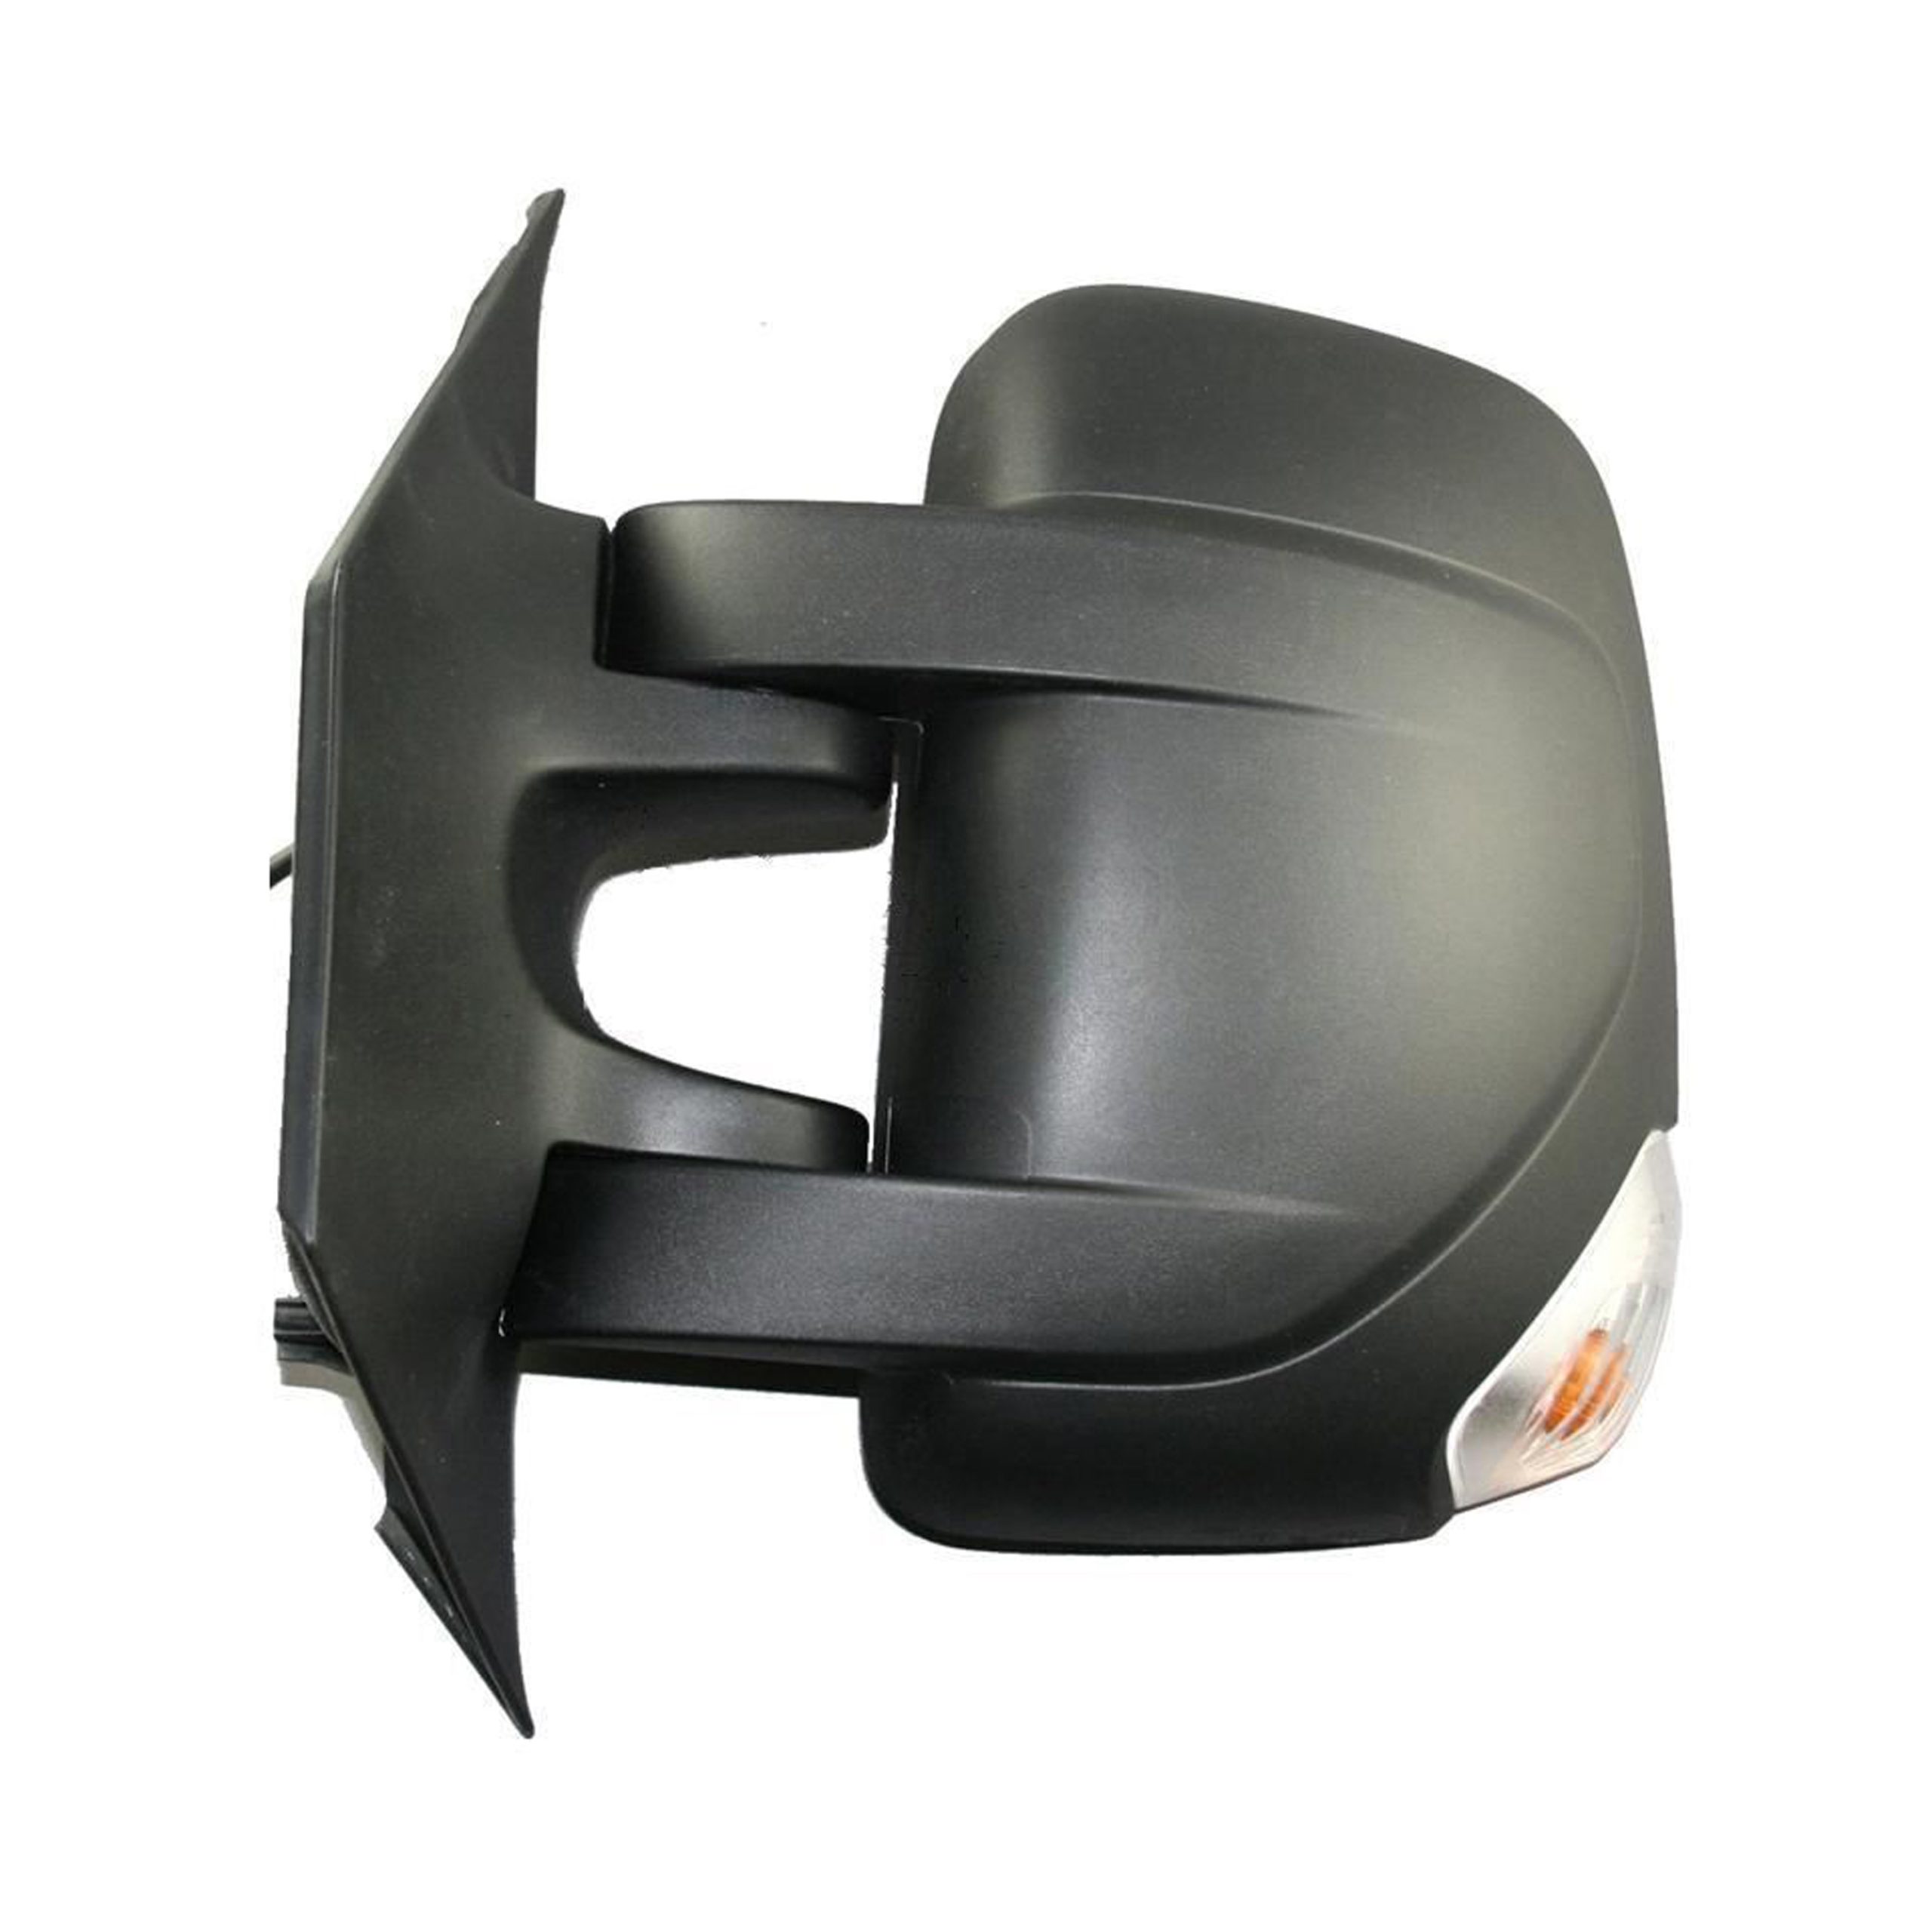 Vauxhall Movano Complete Wing Mirror Unit LEFT HAND ( UK Passenger Side ) 2011 to 2020 – Manual Wing Mirror Unit ( SHORT Arm )